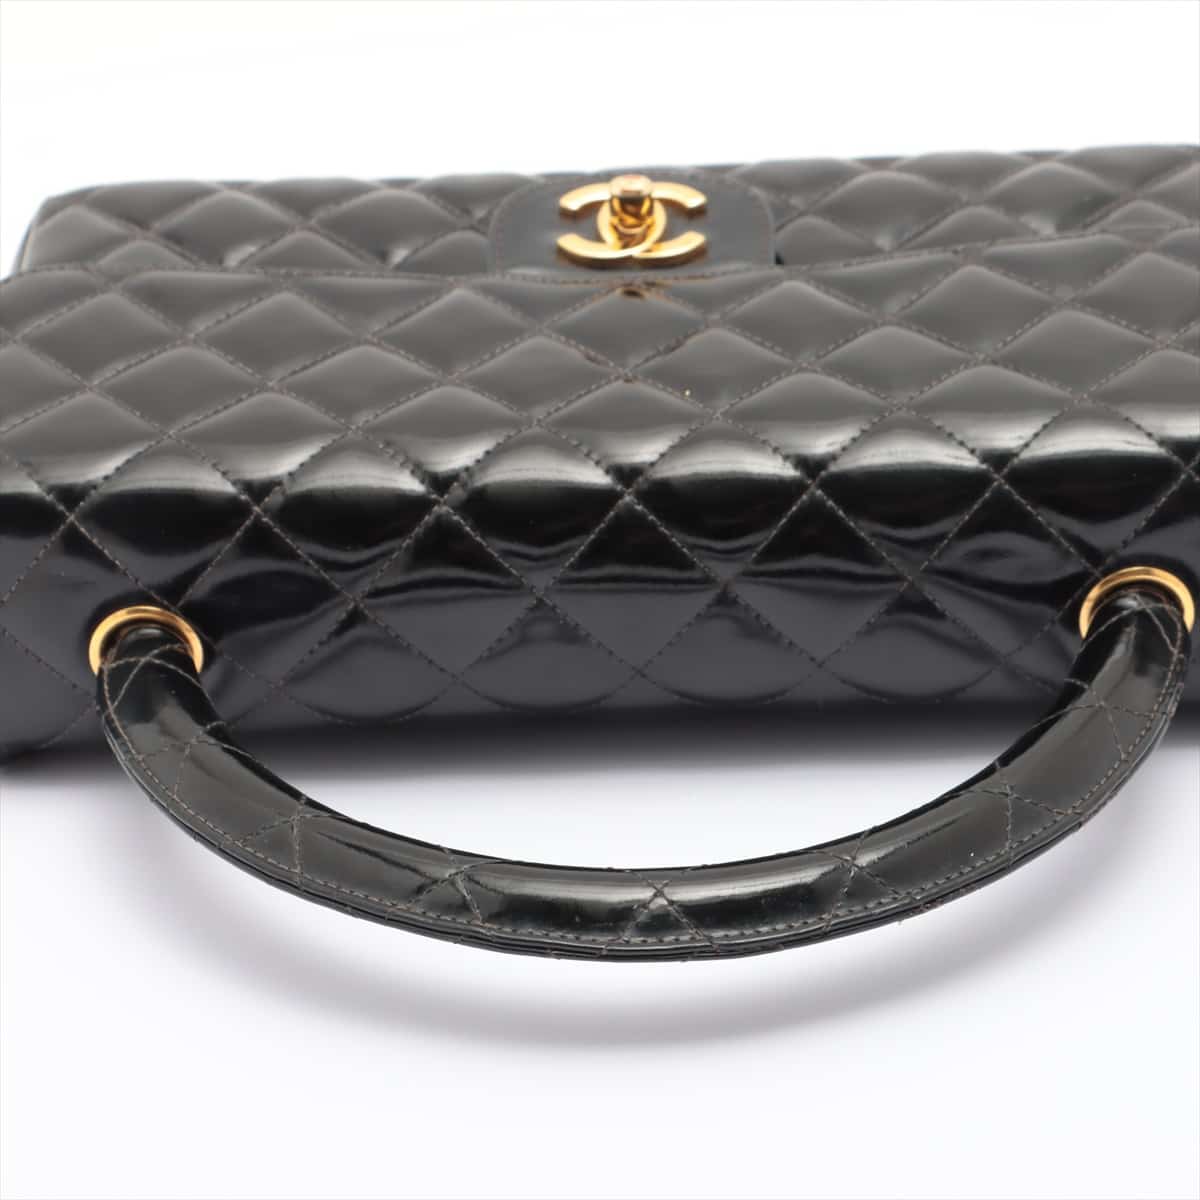 Chanel Matelasse Patent leather Hand bag Black Gold Metal fittings 4XXXXXX